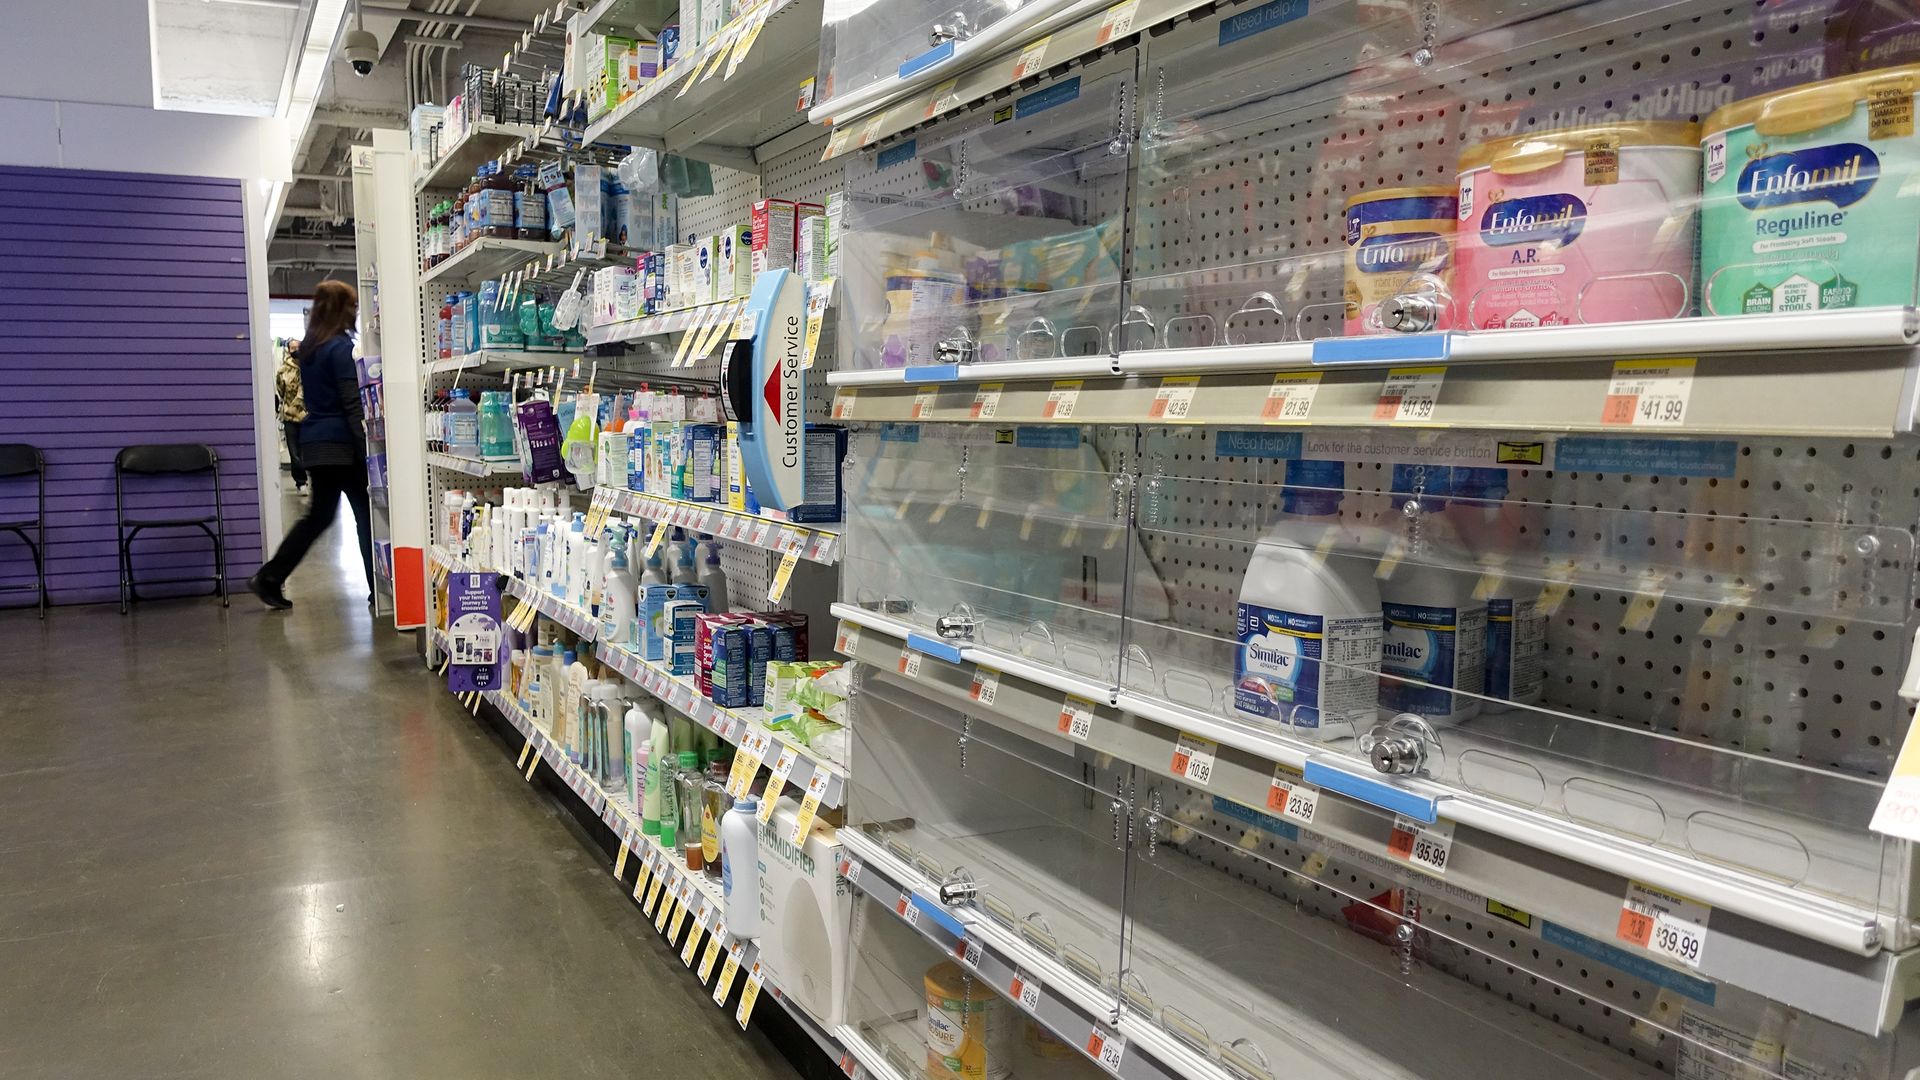 Largely empty shelves of baby formula behind a glass case